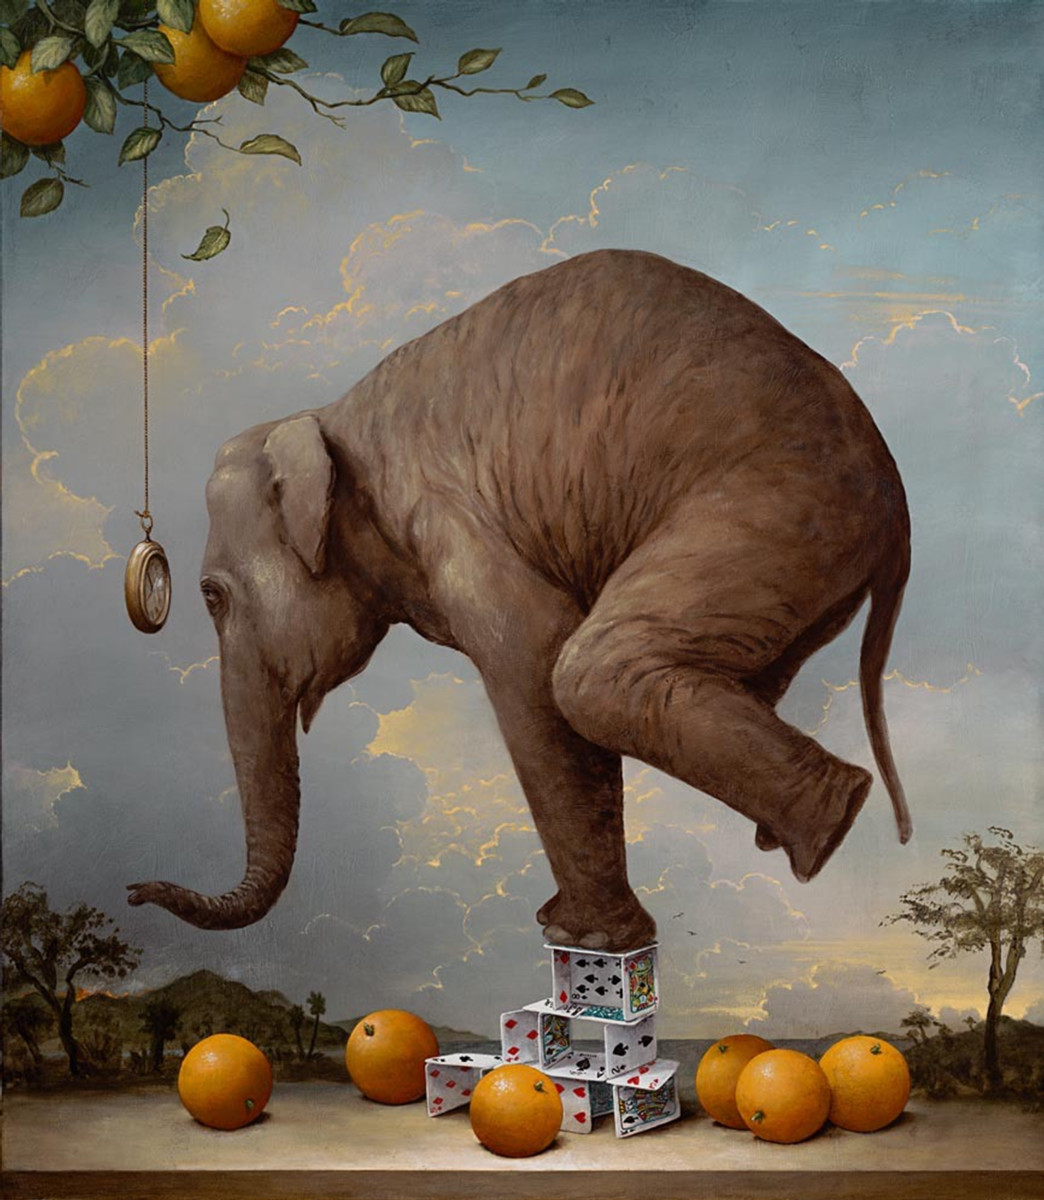 Consequences of Hypnosis by Kevin Sloan 